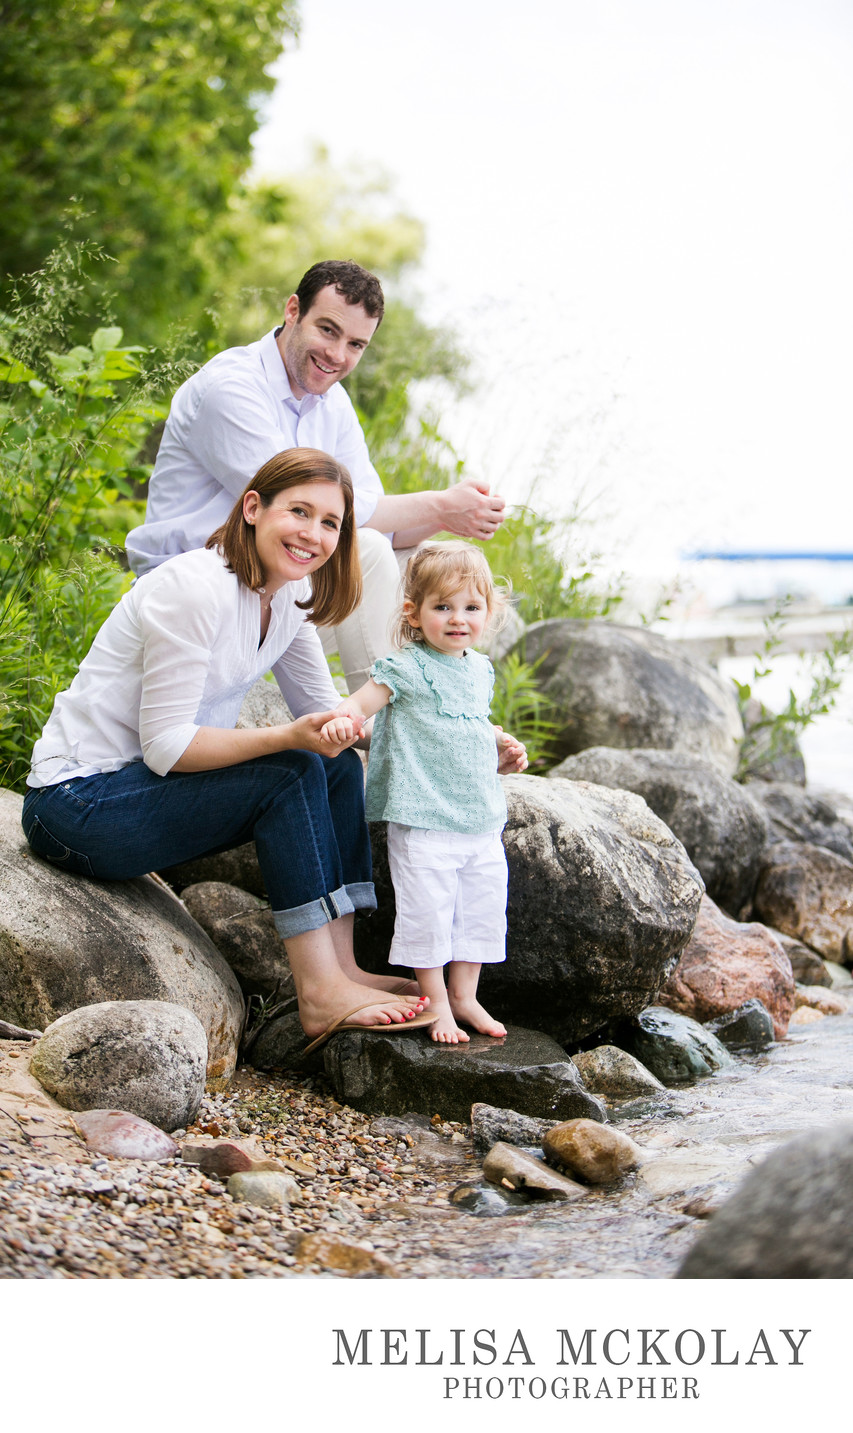 Happy Place | Family Vacation Portrait | Torch Lake, MI